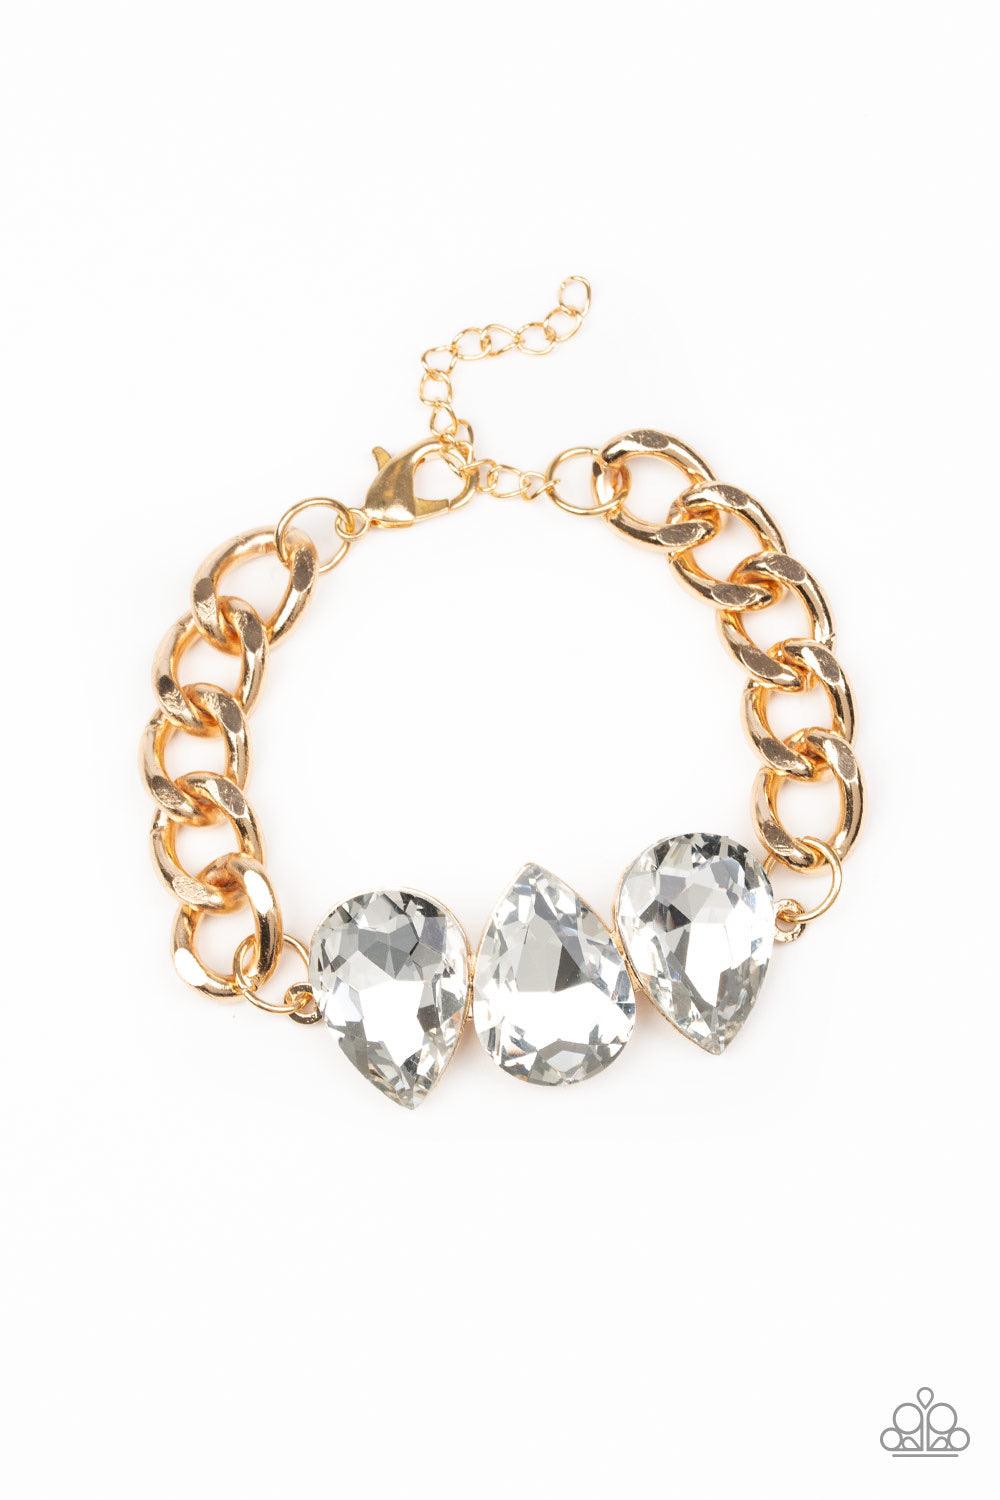 Paparazzi Accessories Bring Your Own Bling - Gold Three oversized white teardrop gems join at the center of a dramatic gold chain, creating a jaw-dropping display across the wrist. Features an adjustable clasp closure. Jewelry